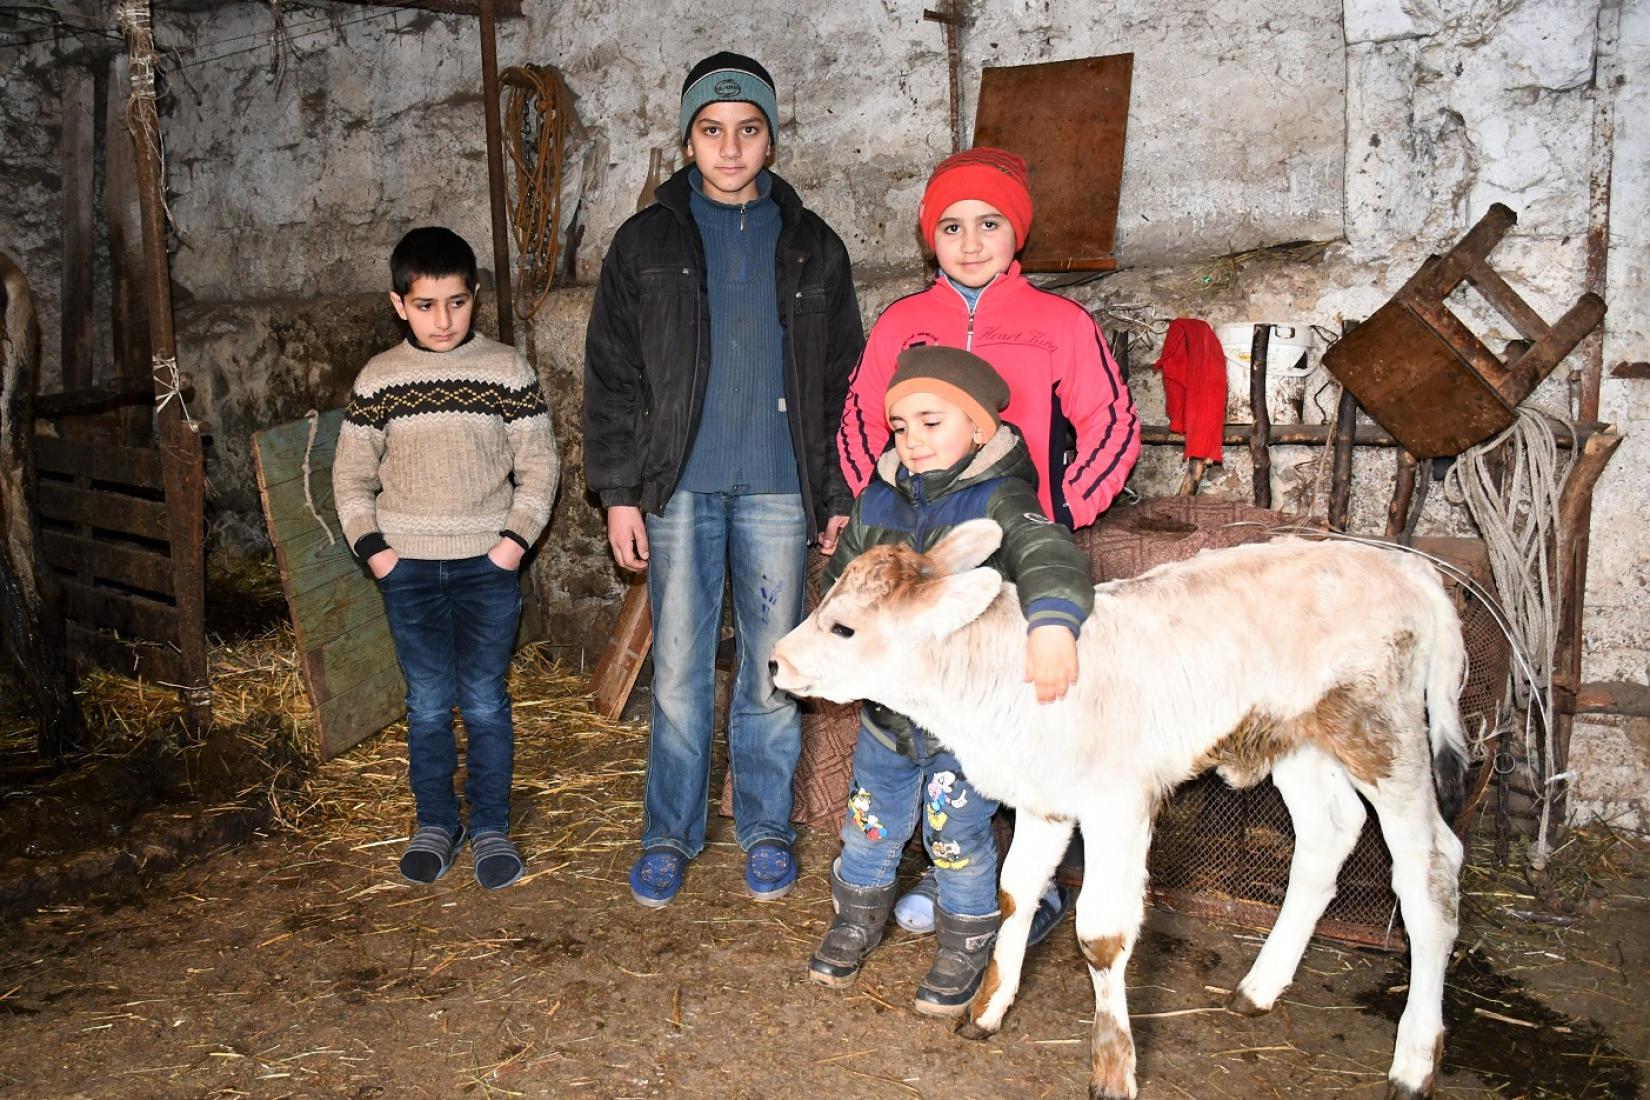 Mkhitar’s children take care of Sheko (meaning “blond” in Armenian) – a cute calf delivered by the cow that FAO previously provided to their family.  